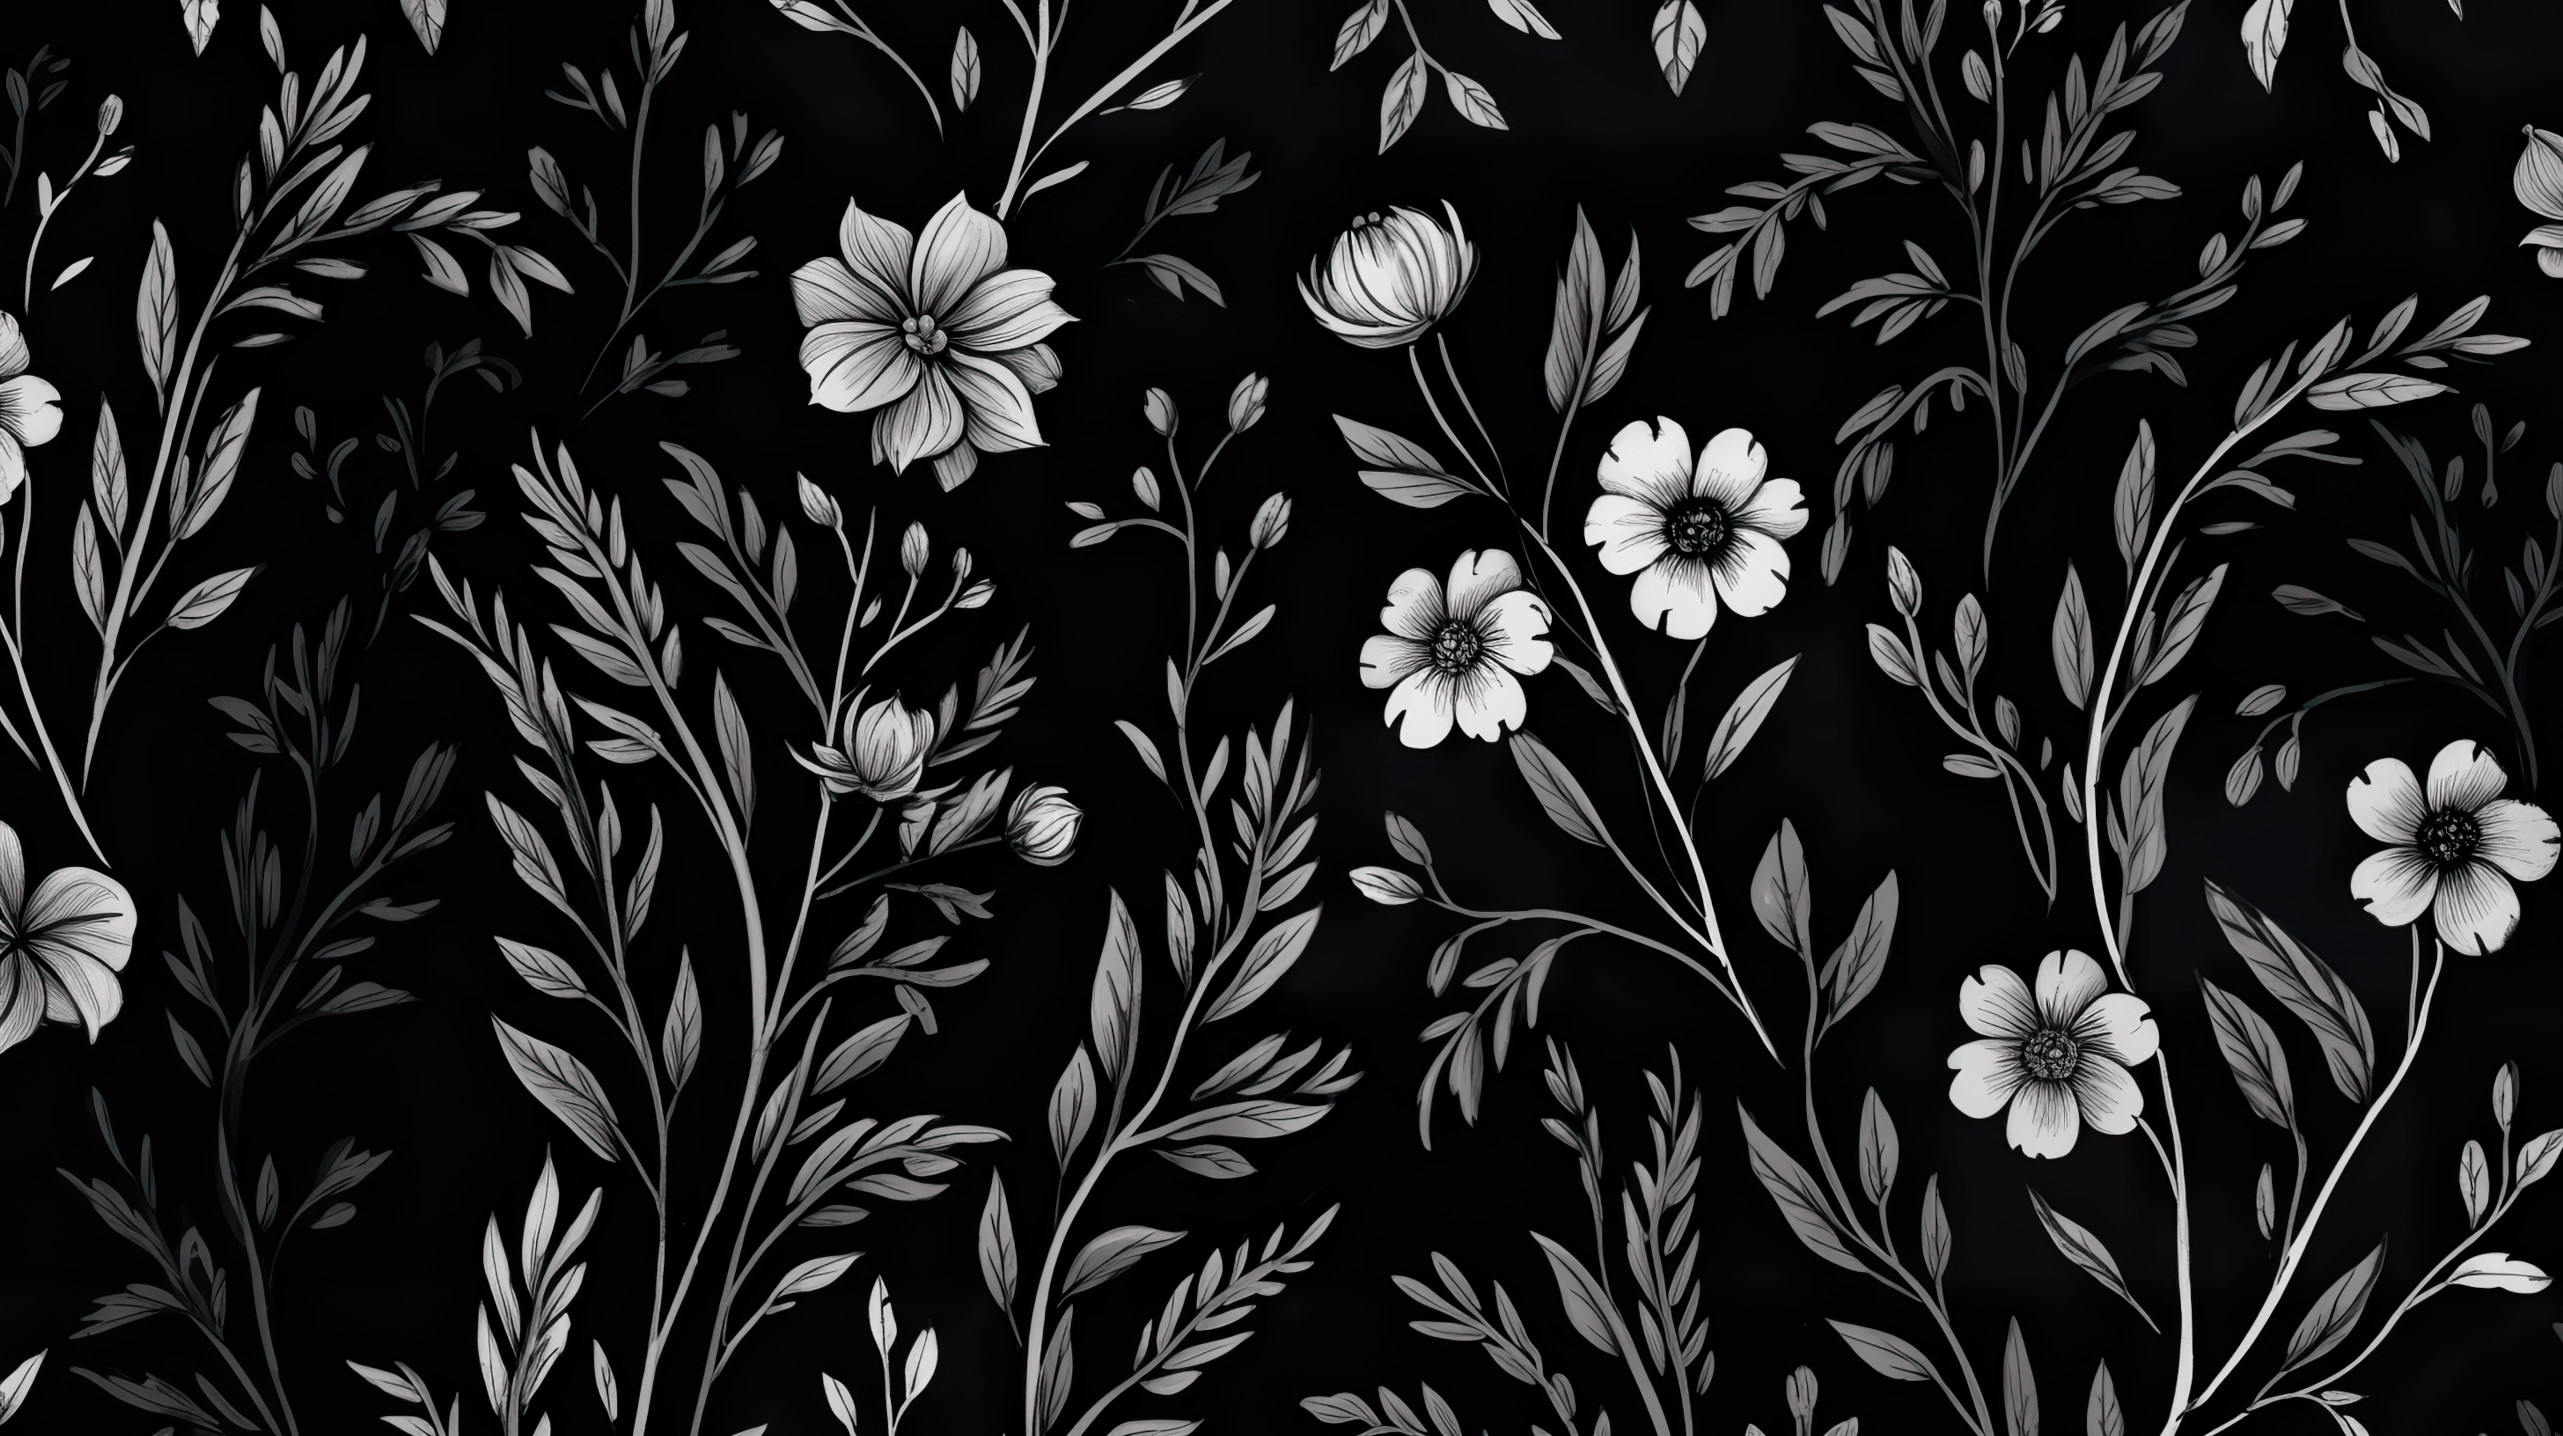 A black and white pattern of flowers and leaves - Black, gray, botanical, design